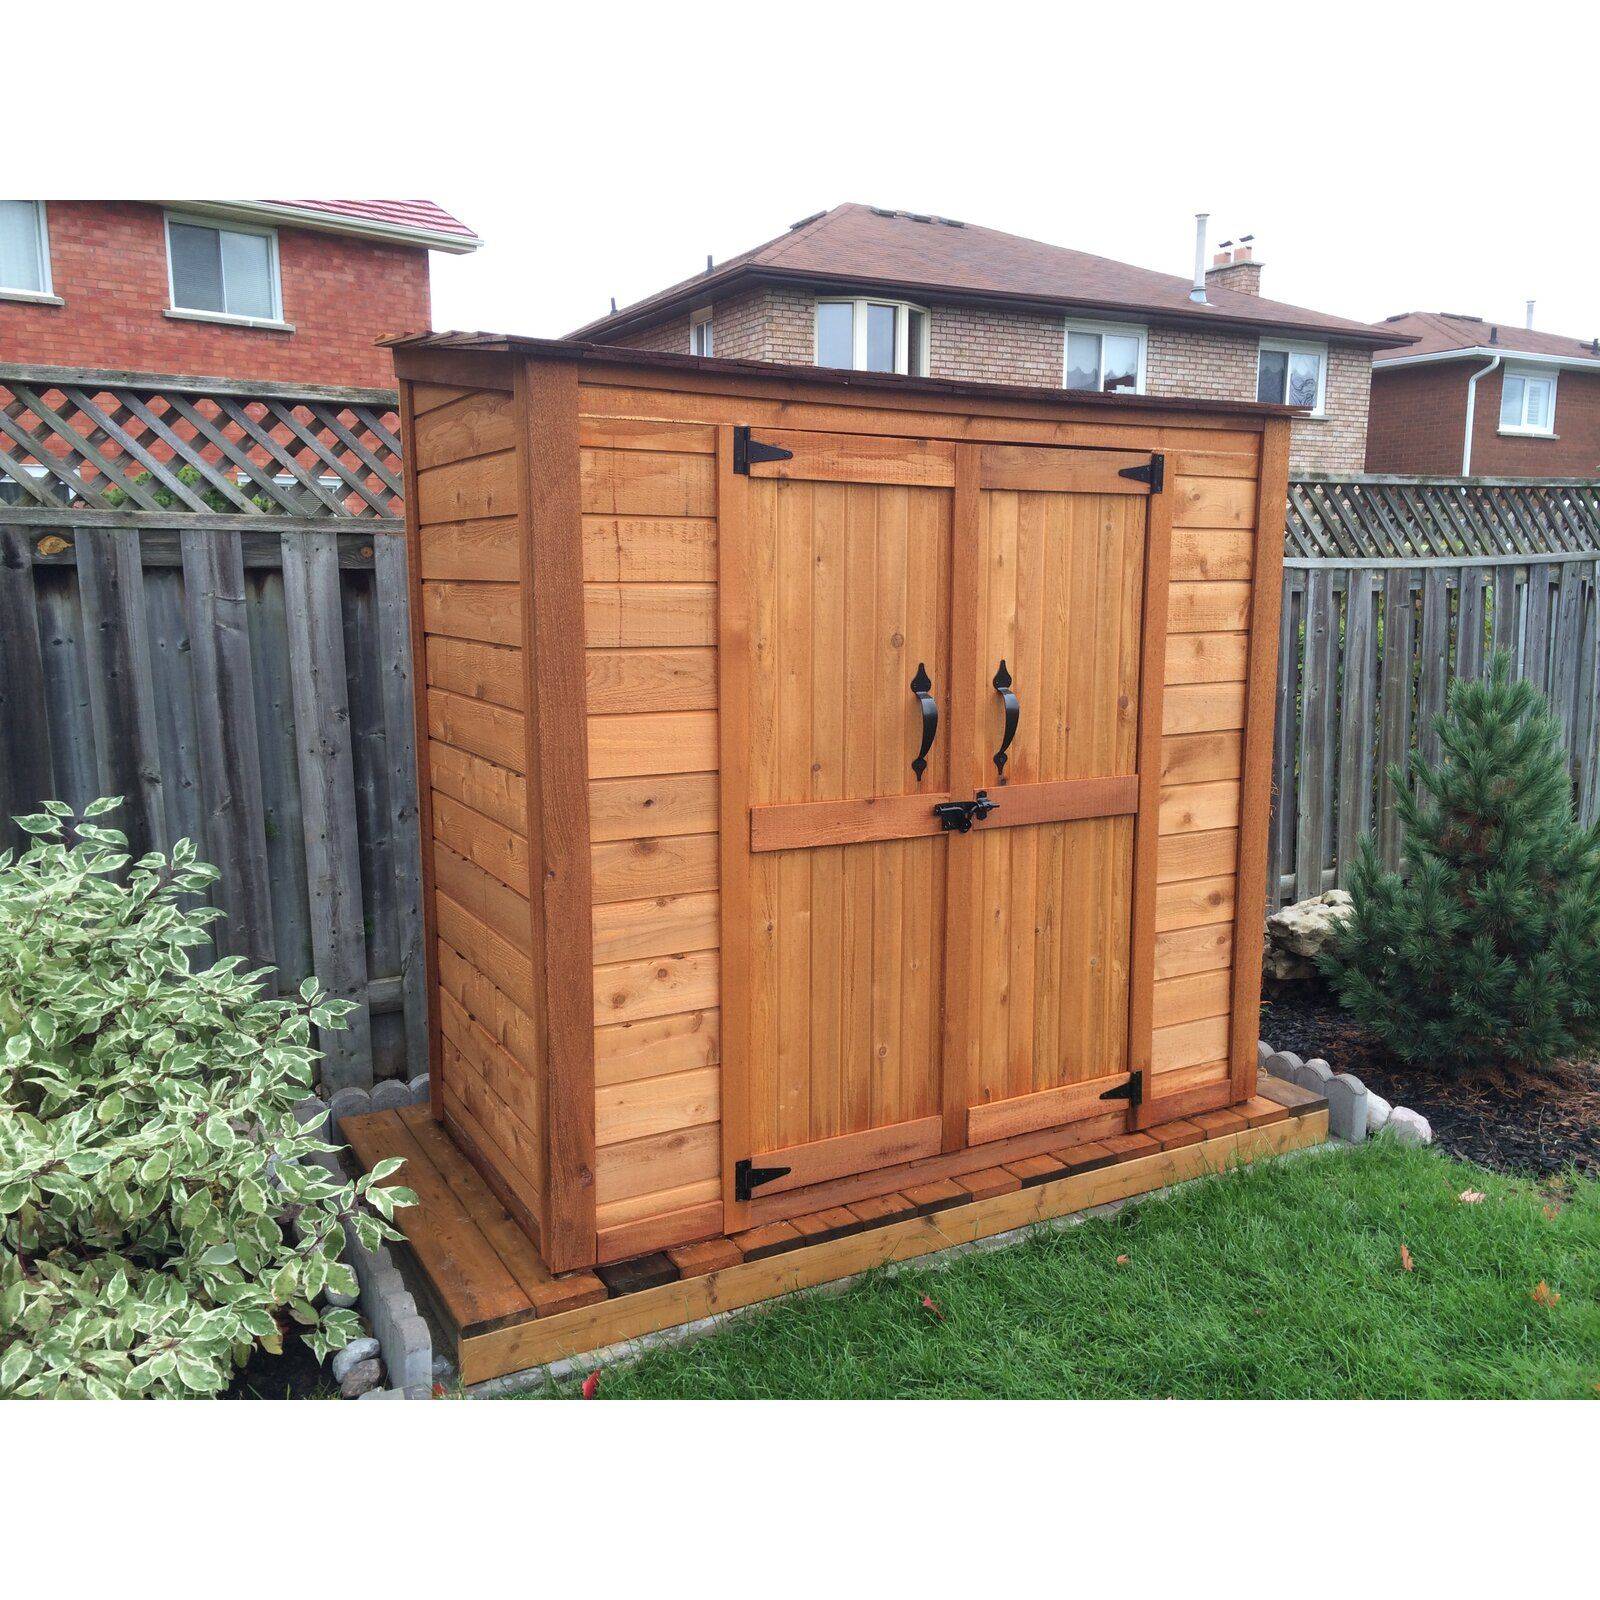 Outdoor Living Today Ggcsr Grand Garden Chalet X Ft Storage Shed